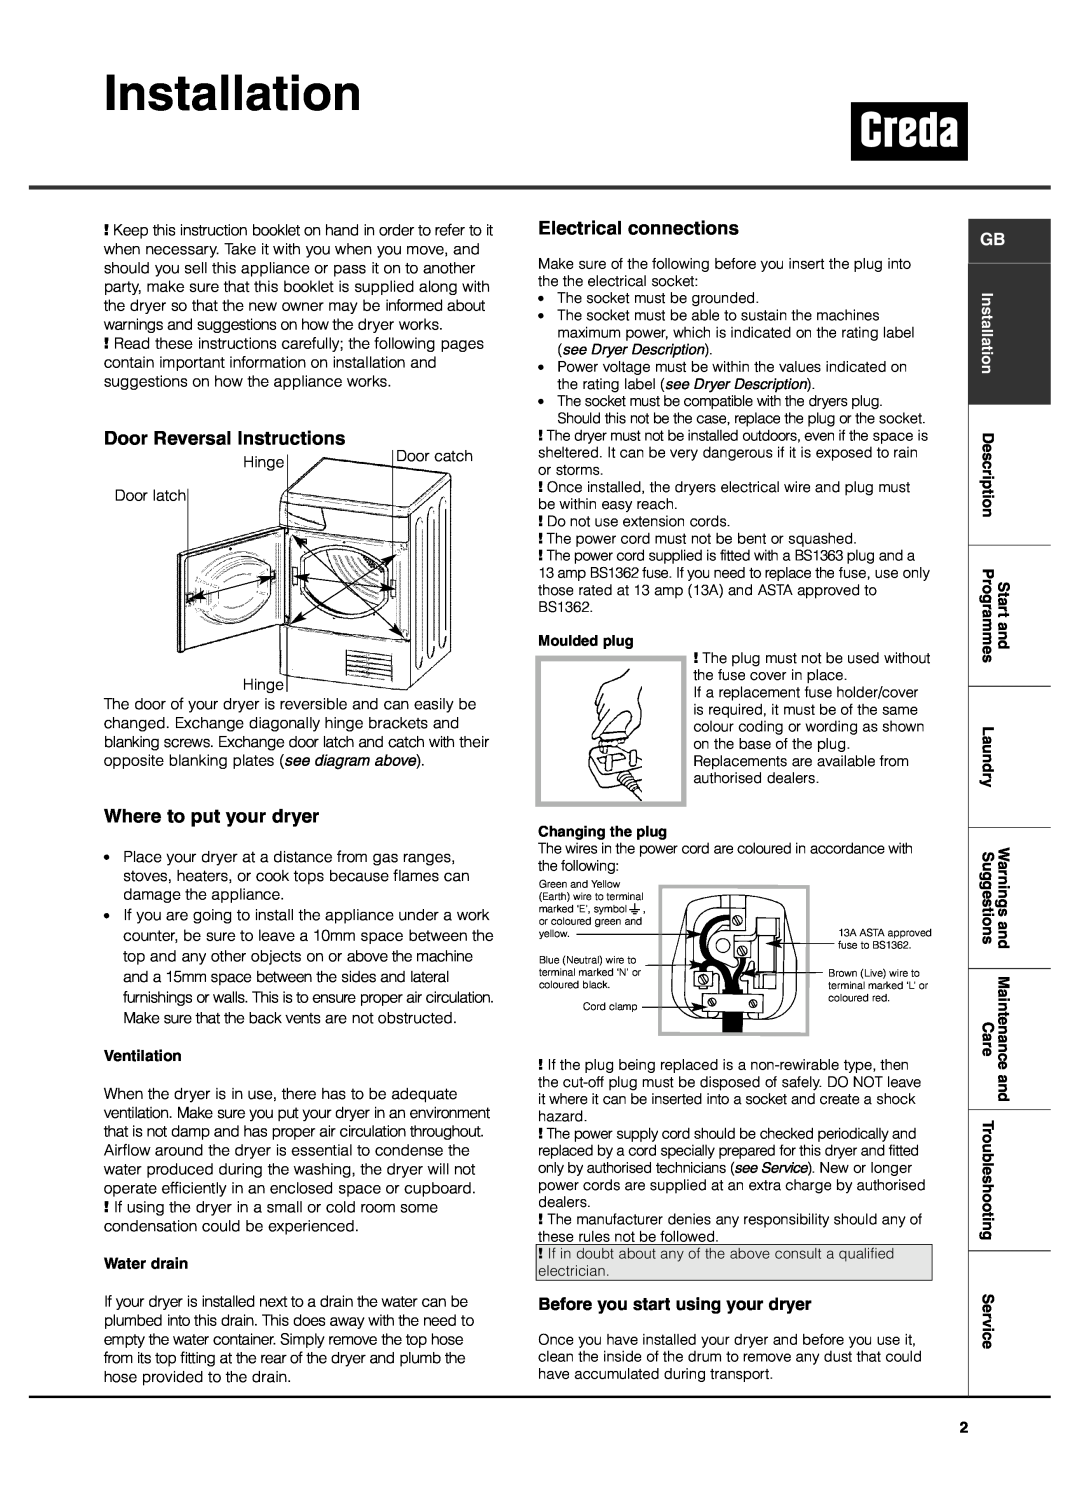 Creda TCR2 Installation, Door Reversal Instructions, Where to put your dryer, Electrical connections, Ventilation, Laundry 